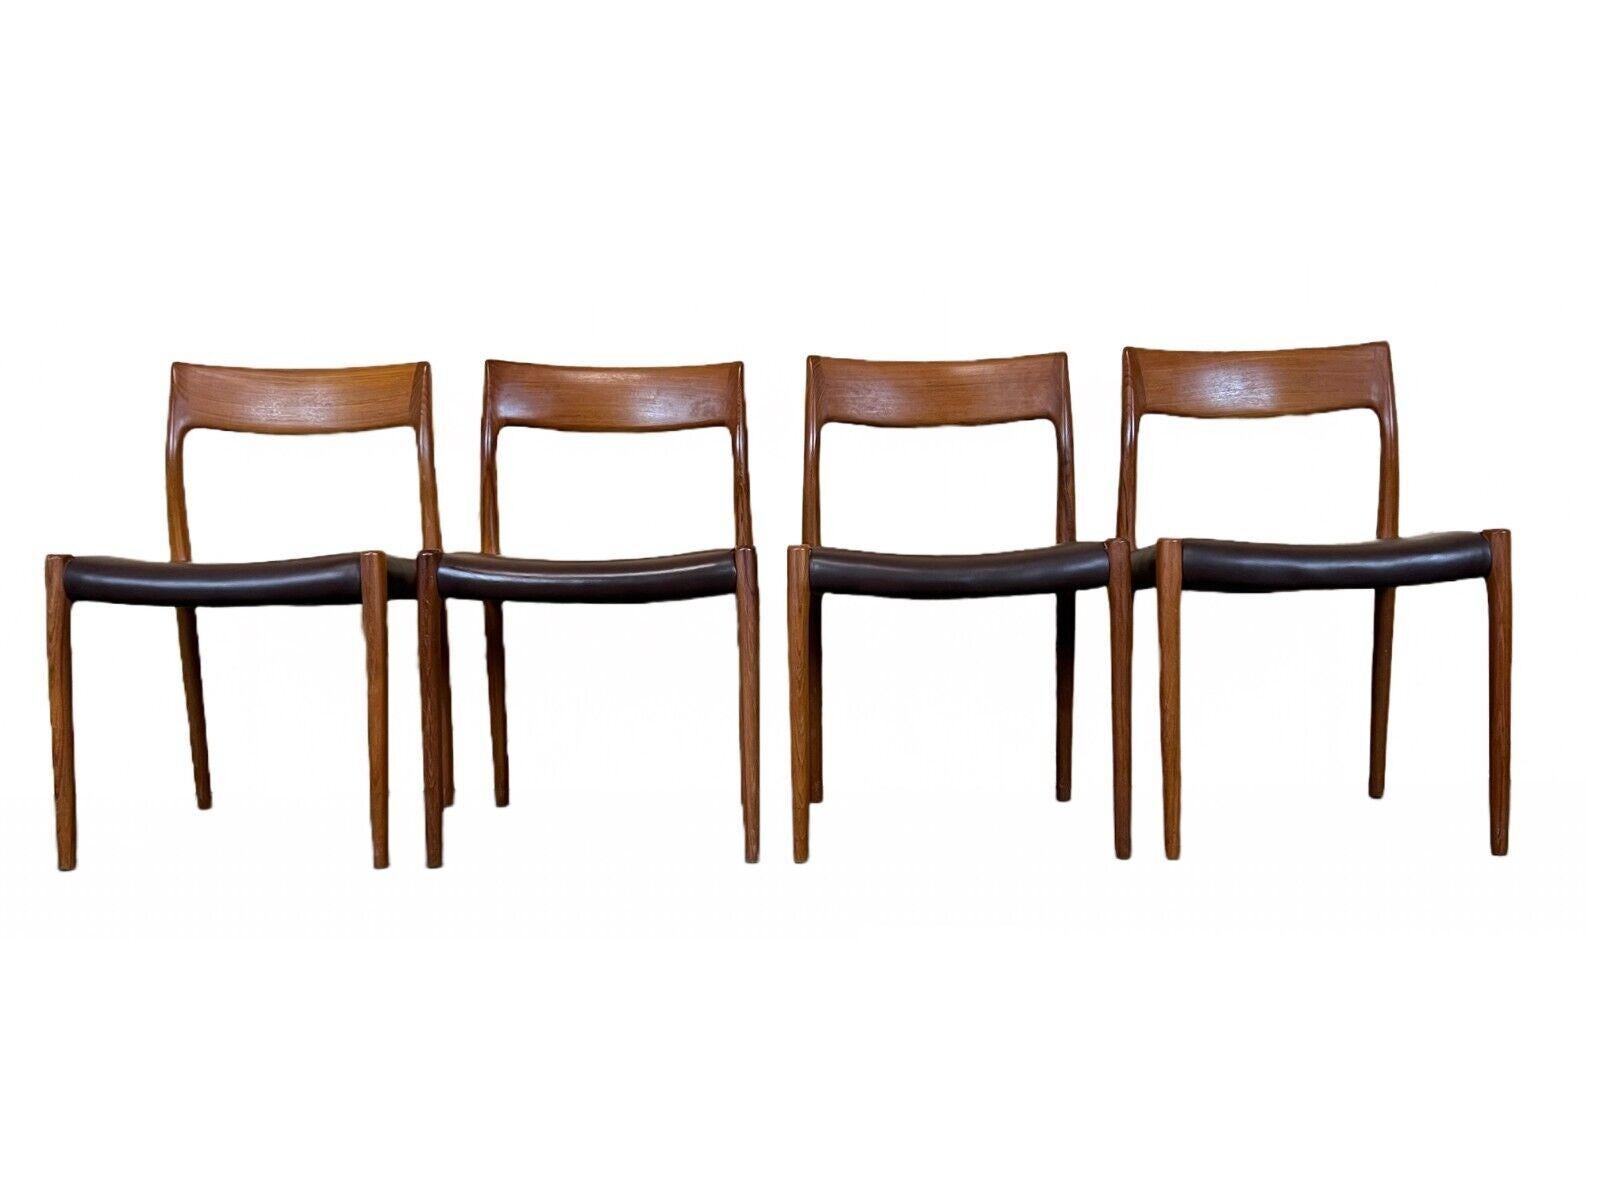 4x 60s 70s chairs teak dining chair Niels O. Möller for J.L. Moller's 60s

Object: 4x chair

Manufacturer: J.L. Mollers

Condition: good - vintage

Age: around 1960-1970

Dimensions:

Width = 50cm
Depth = 48.5cm
Height = 76.5cm
Seat